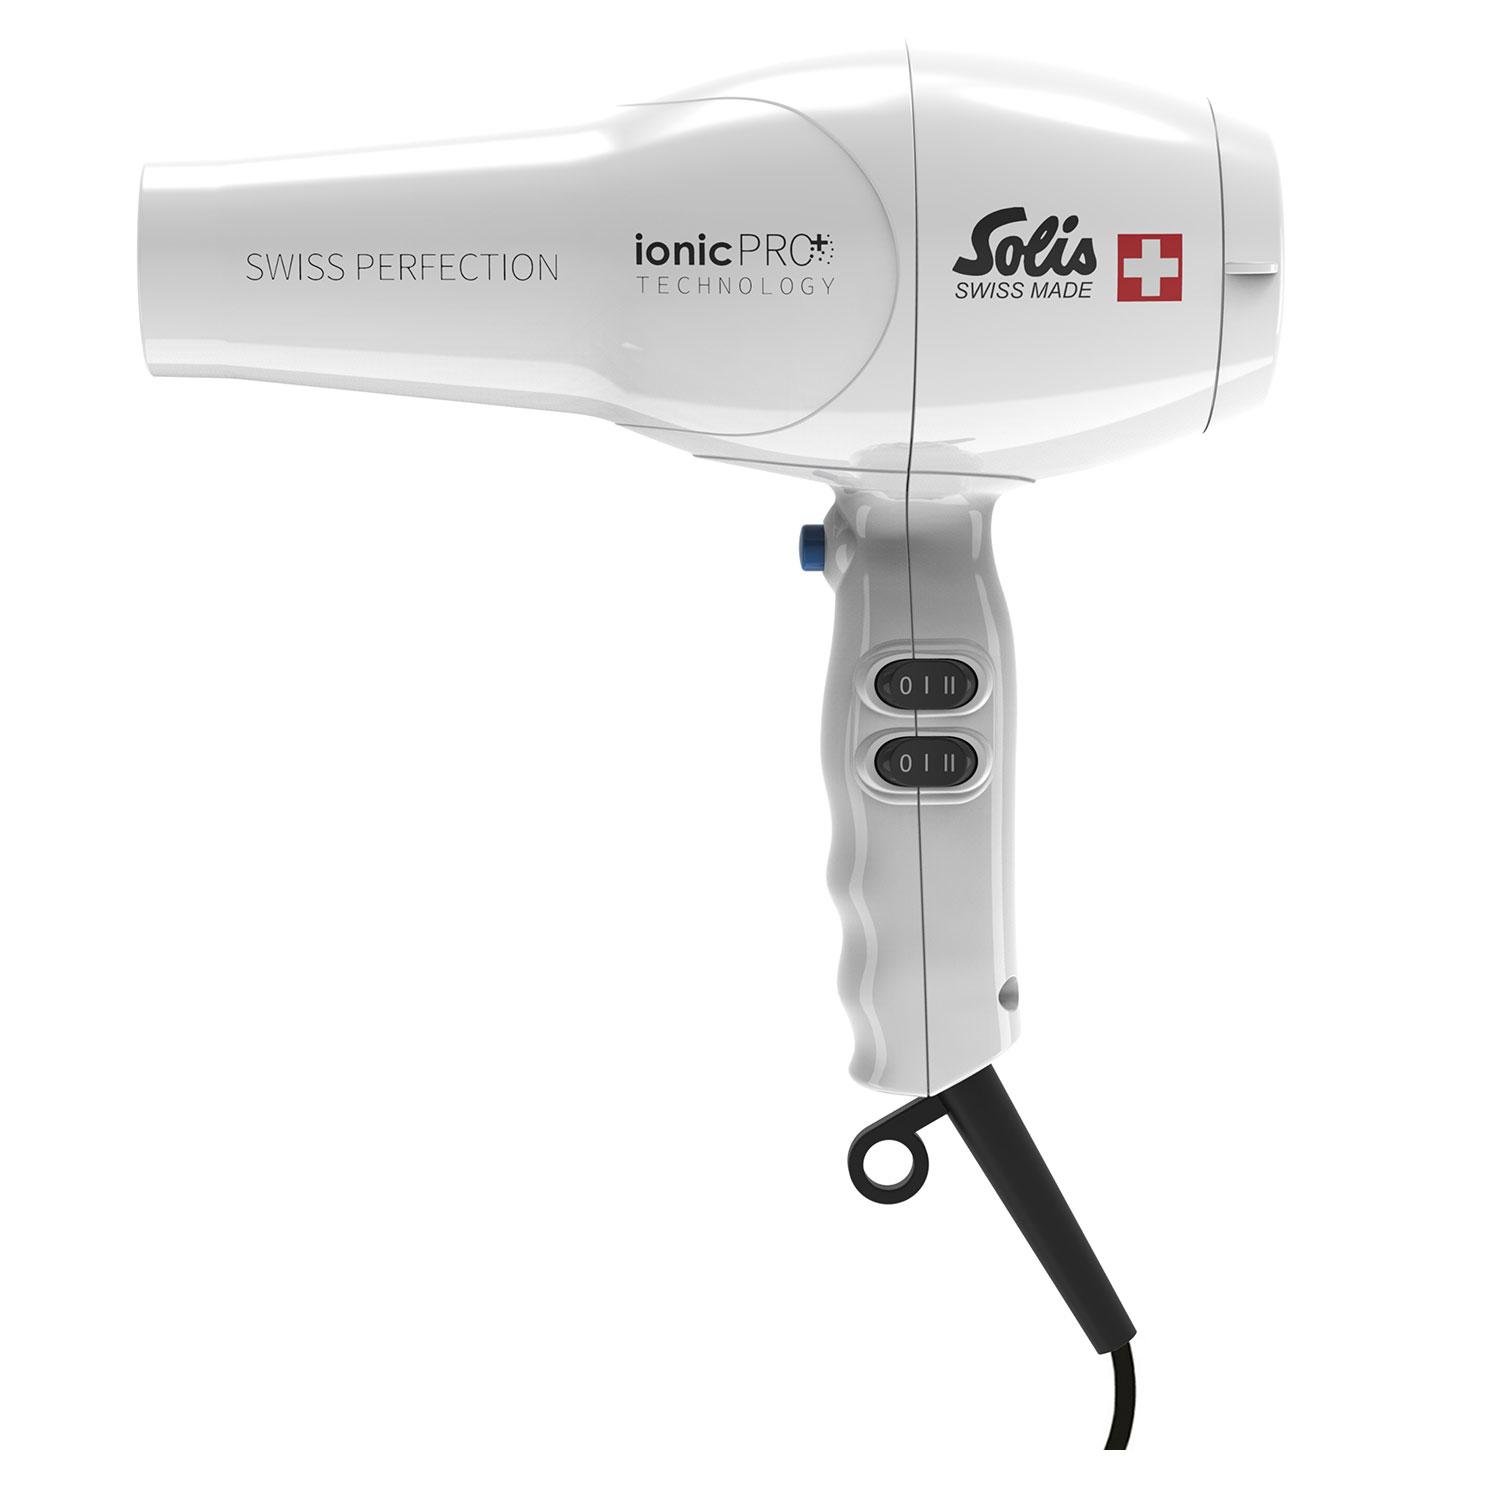 Solis - Swiss Perfection 360º ionicPRO Weiss